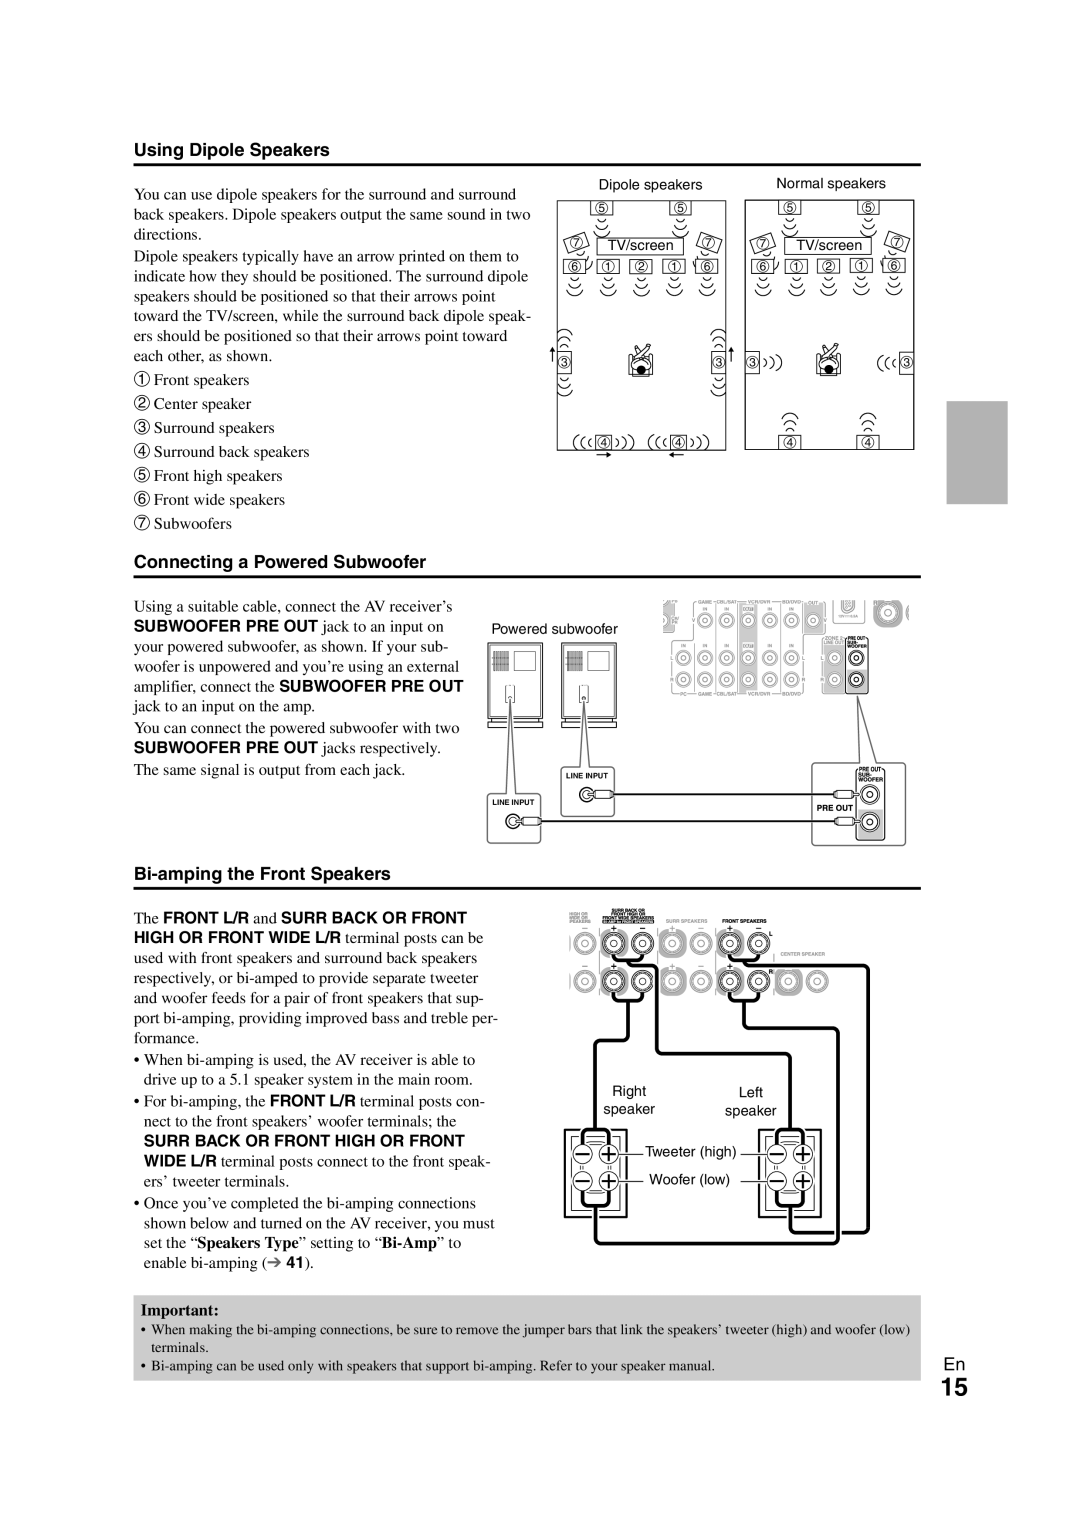 Onkyo SR608 instruction manual Using Dipole Speakers, Connecting a Powered Subwoofer, Bi-ampingthe Front Speakers 